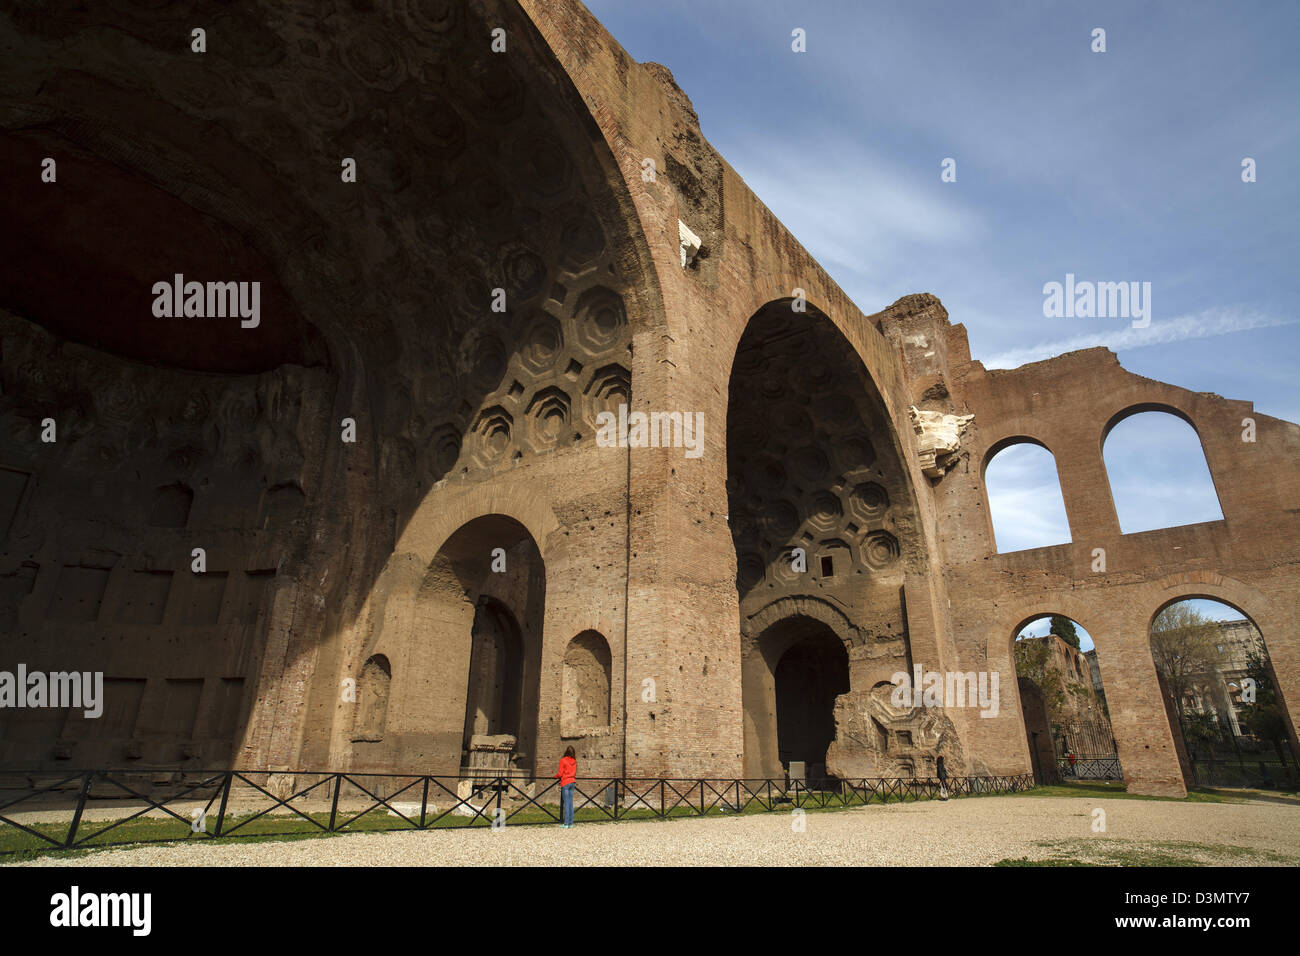 Basilica of Maxentius and Constantine in the Forum in Rome, the Forum's largest structure built in AD 315 barrel vaults Stock Photo